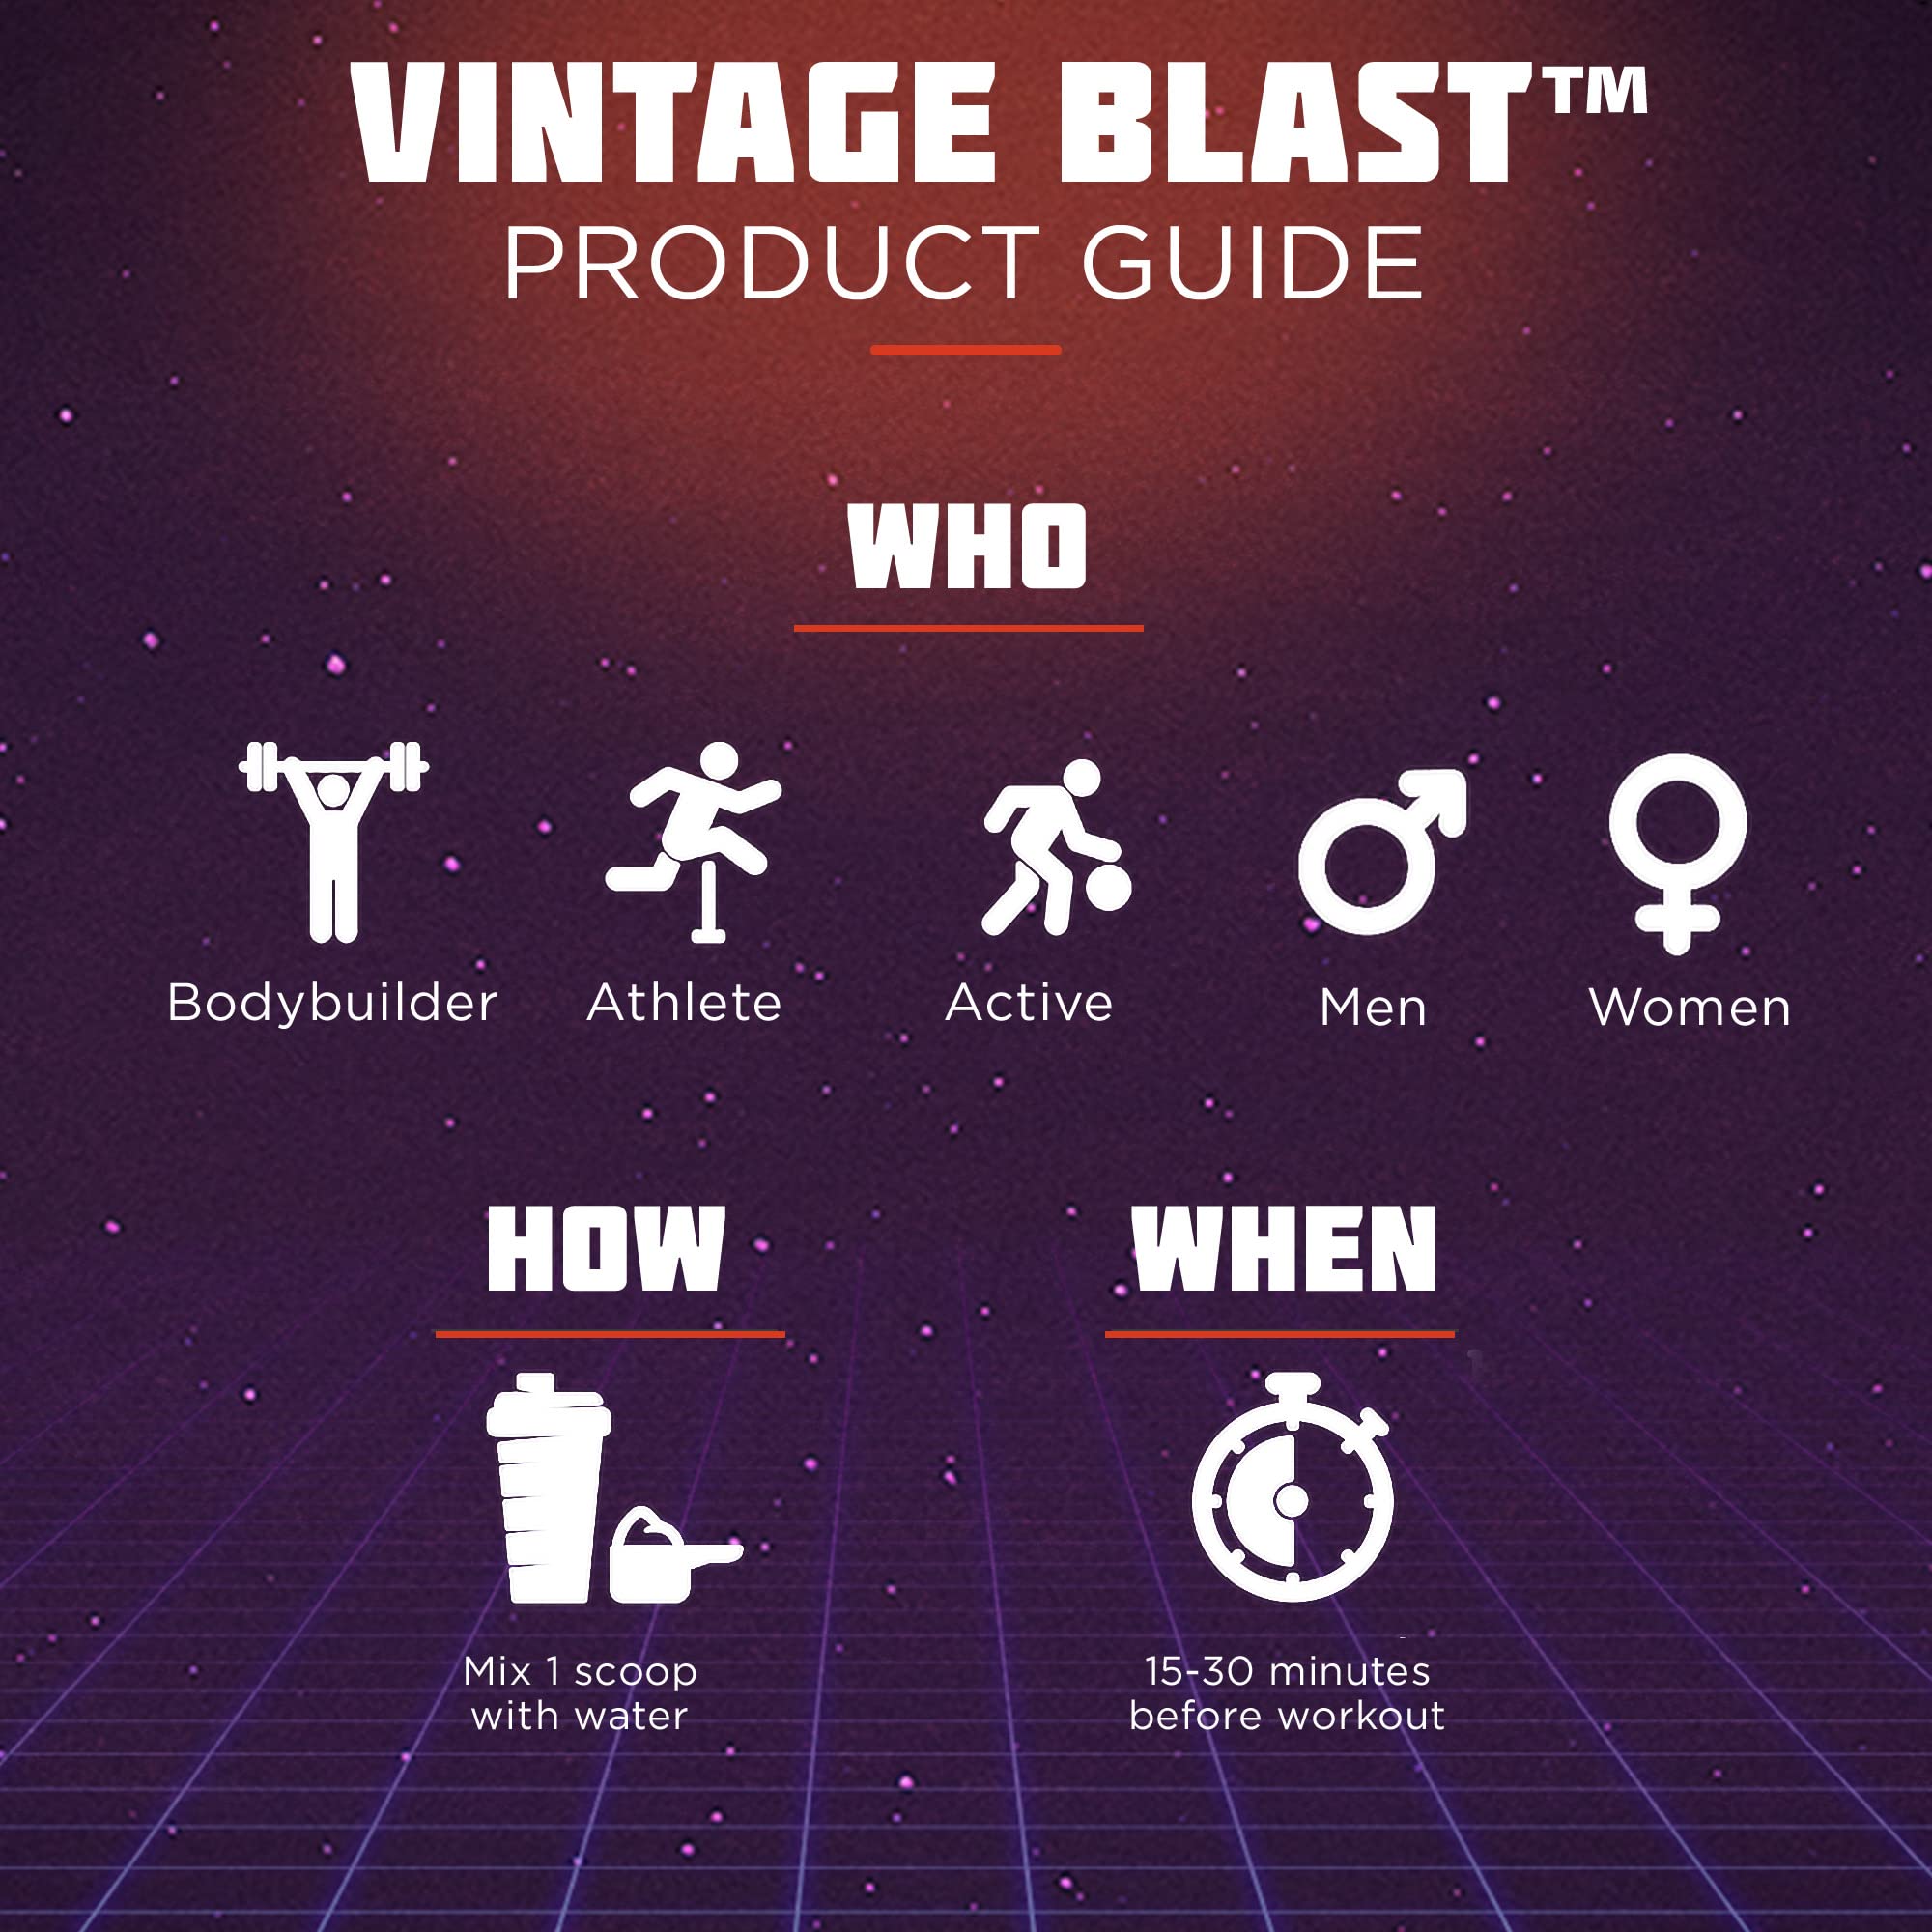 Vintage Blast - The Ultimate Two-Stage Pre Workout Supplement for Explosive Energy, Endurance, & Focus - Boost Workouts with Natural Ingredients: L-Citrulline Malate, Beta-Alanine, & Caffeine - 306g